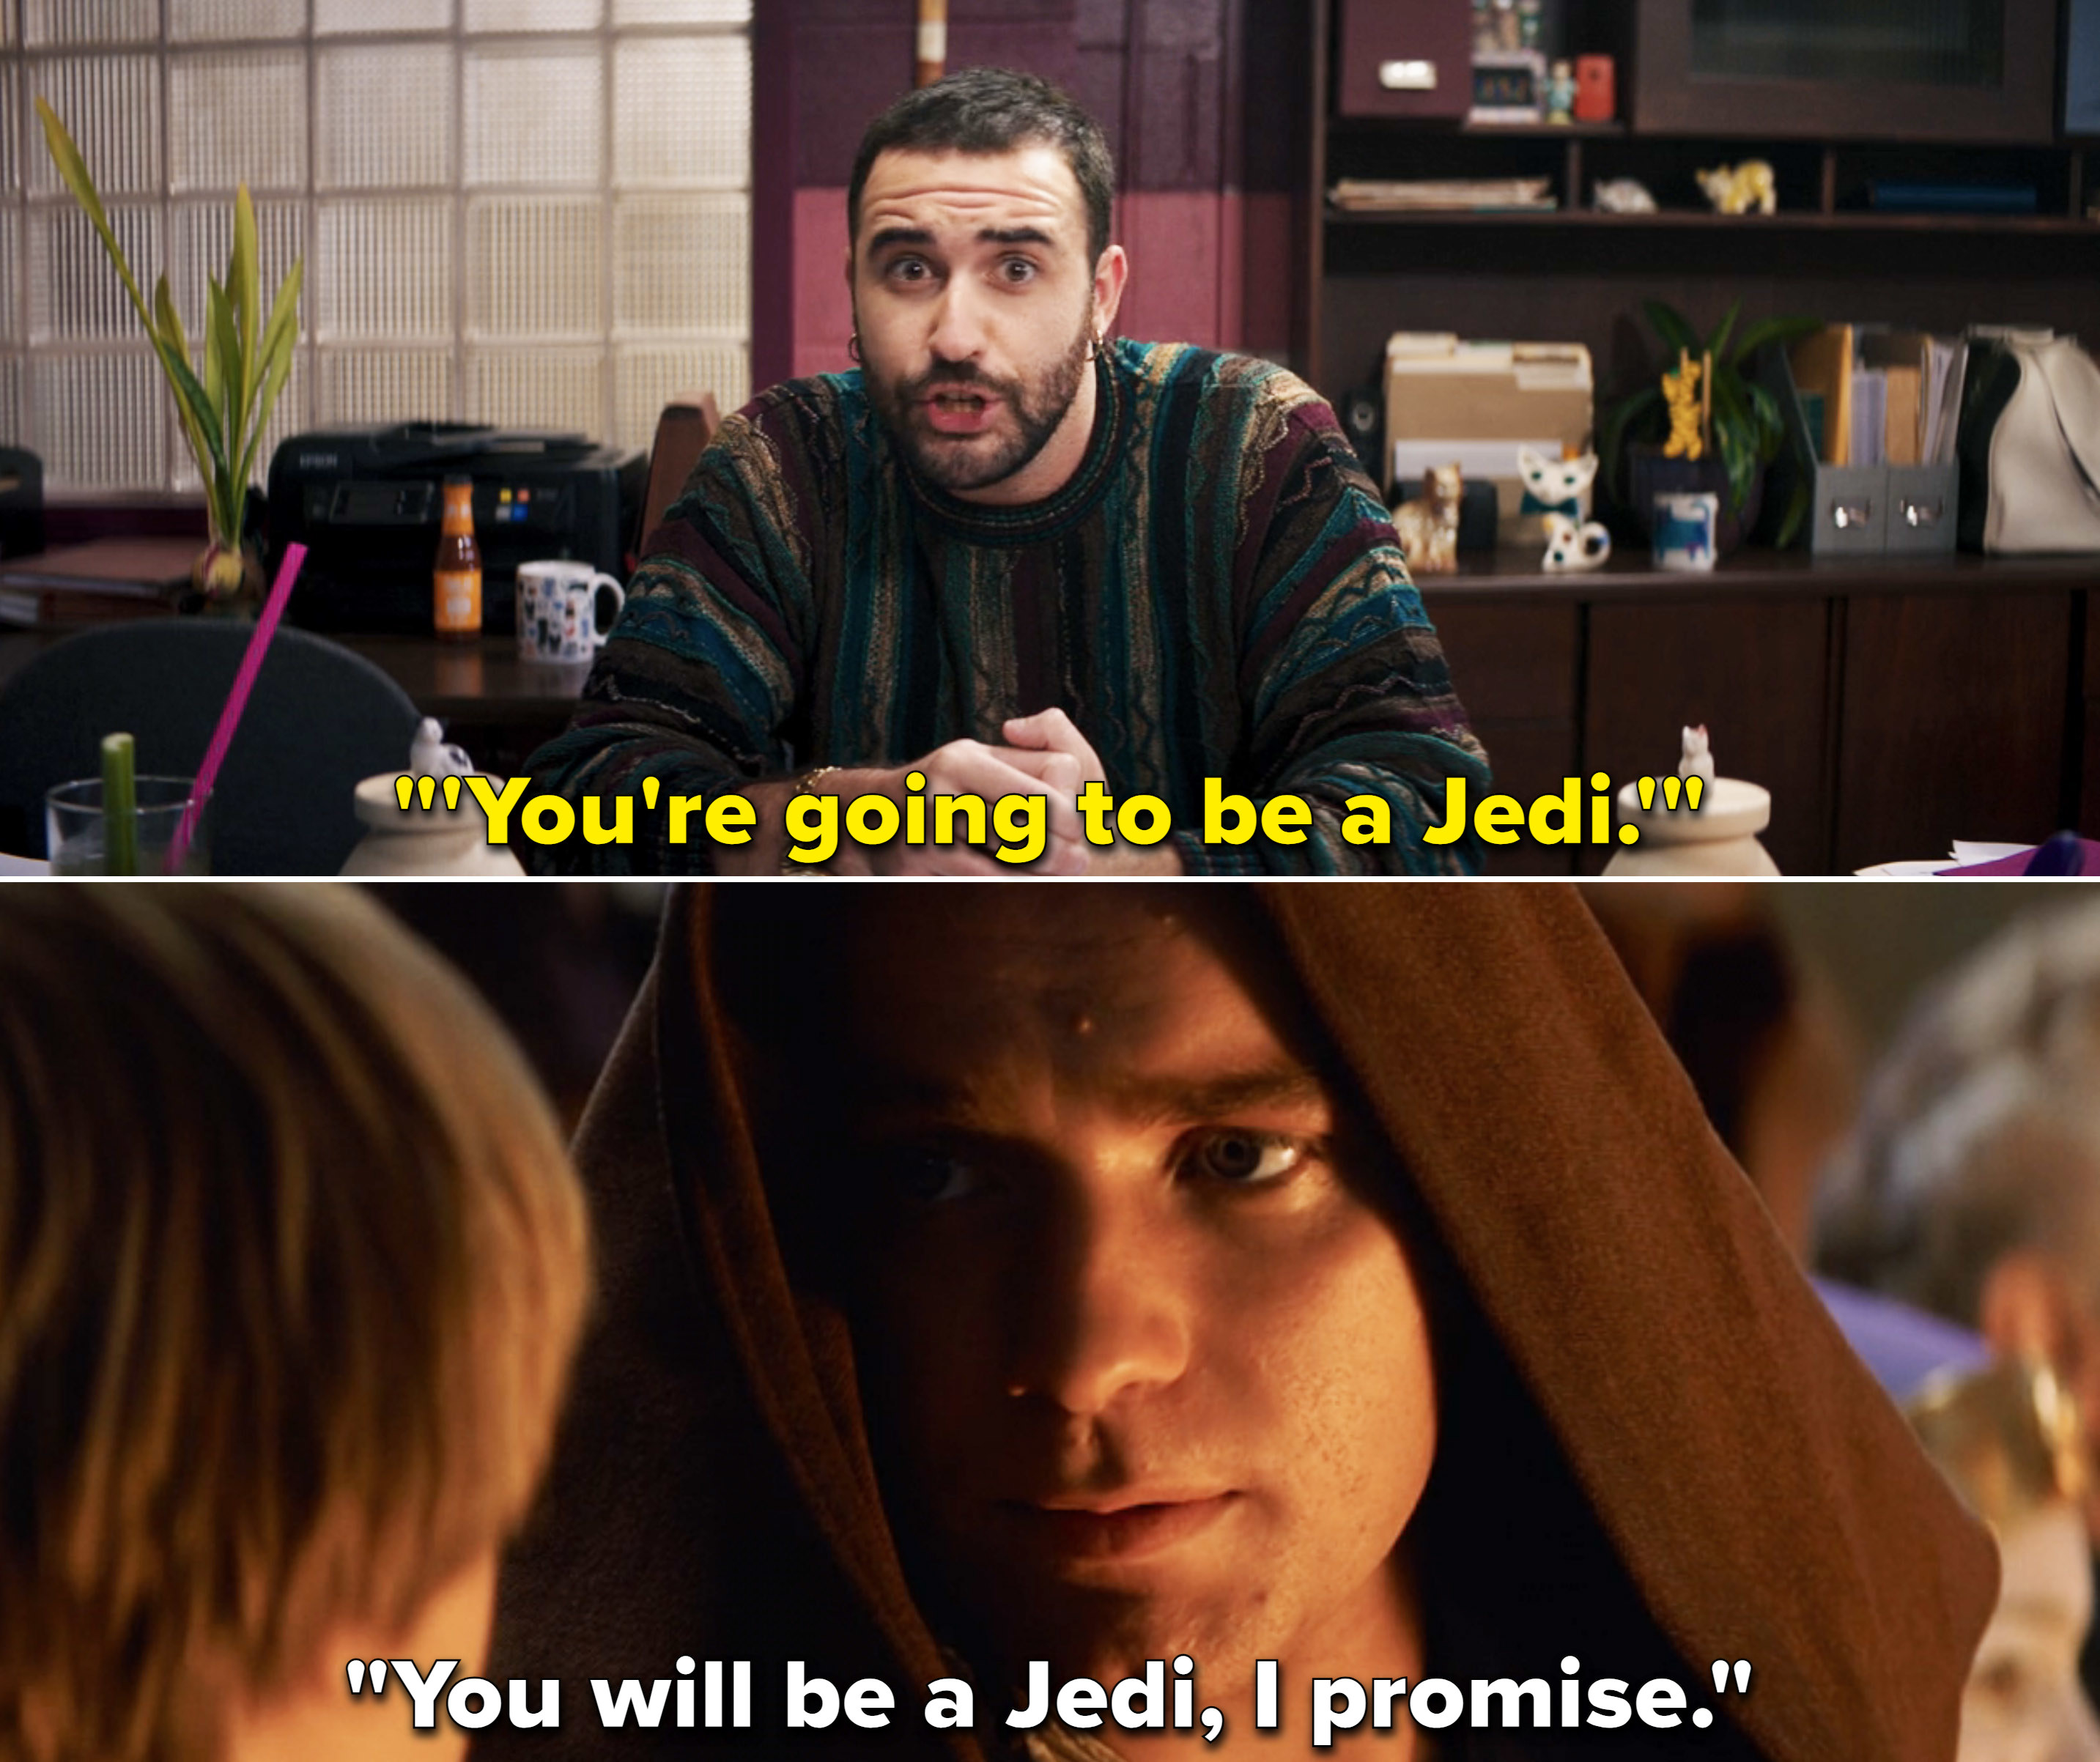 Mr. Wilson saying &quot;You&#x27;re going to be a Jedi&quot; juxtaposed with Obi-Wan saying &quot;You will be a Jedi, I promise&quot;